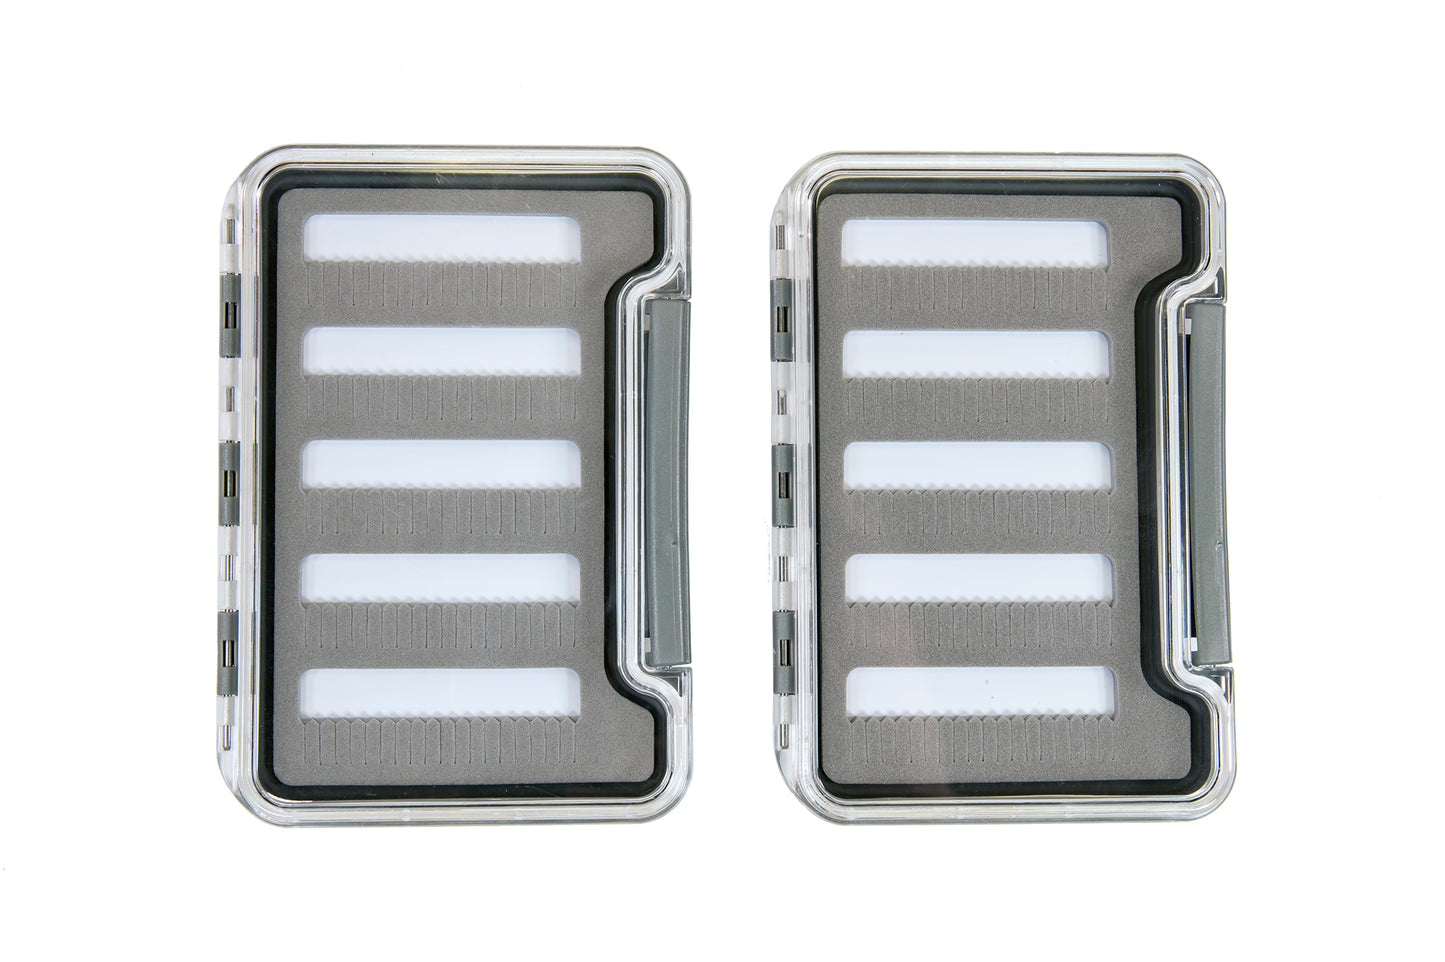 Pair of Fly Boxes for Fly Fishing - Clear Pocket Boxes with Slit Foam Liners #1327